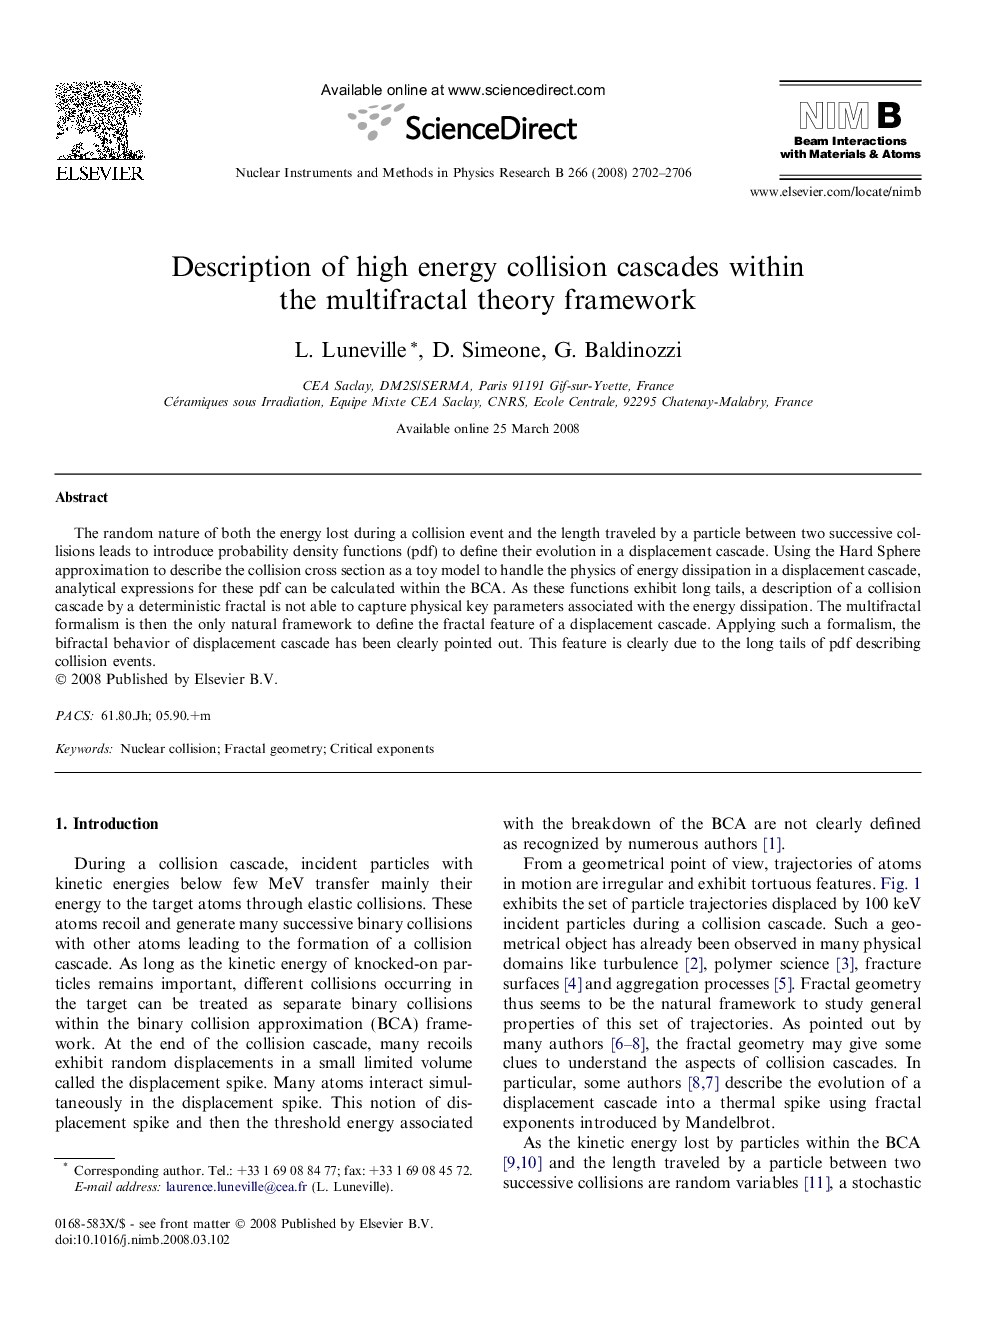 Description of high energy collision cascades within the multifractal theory framework